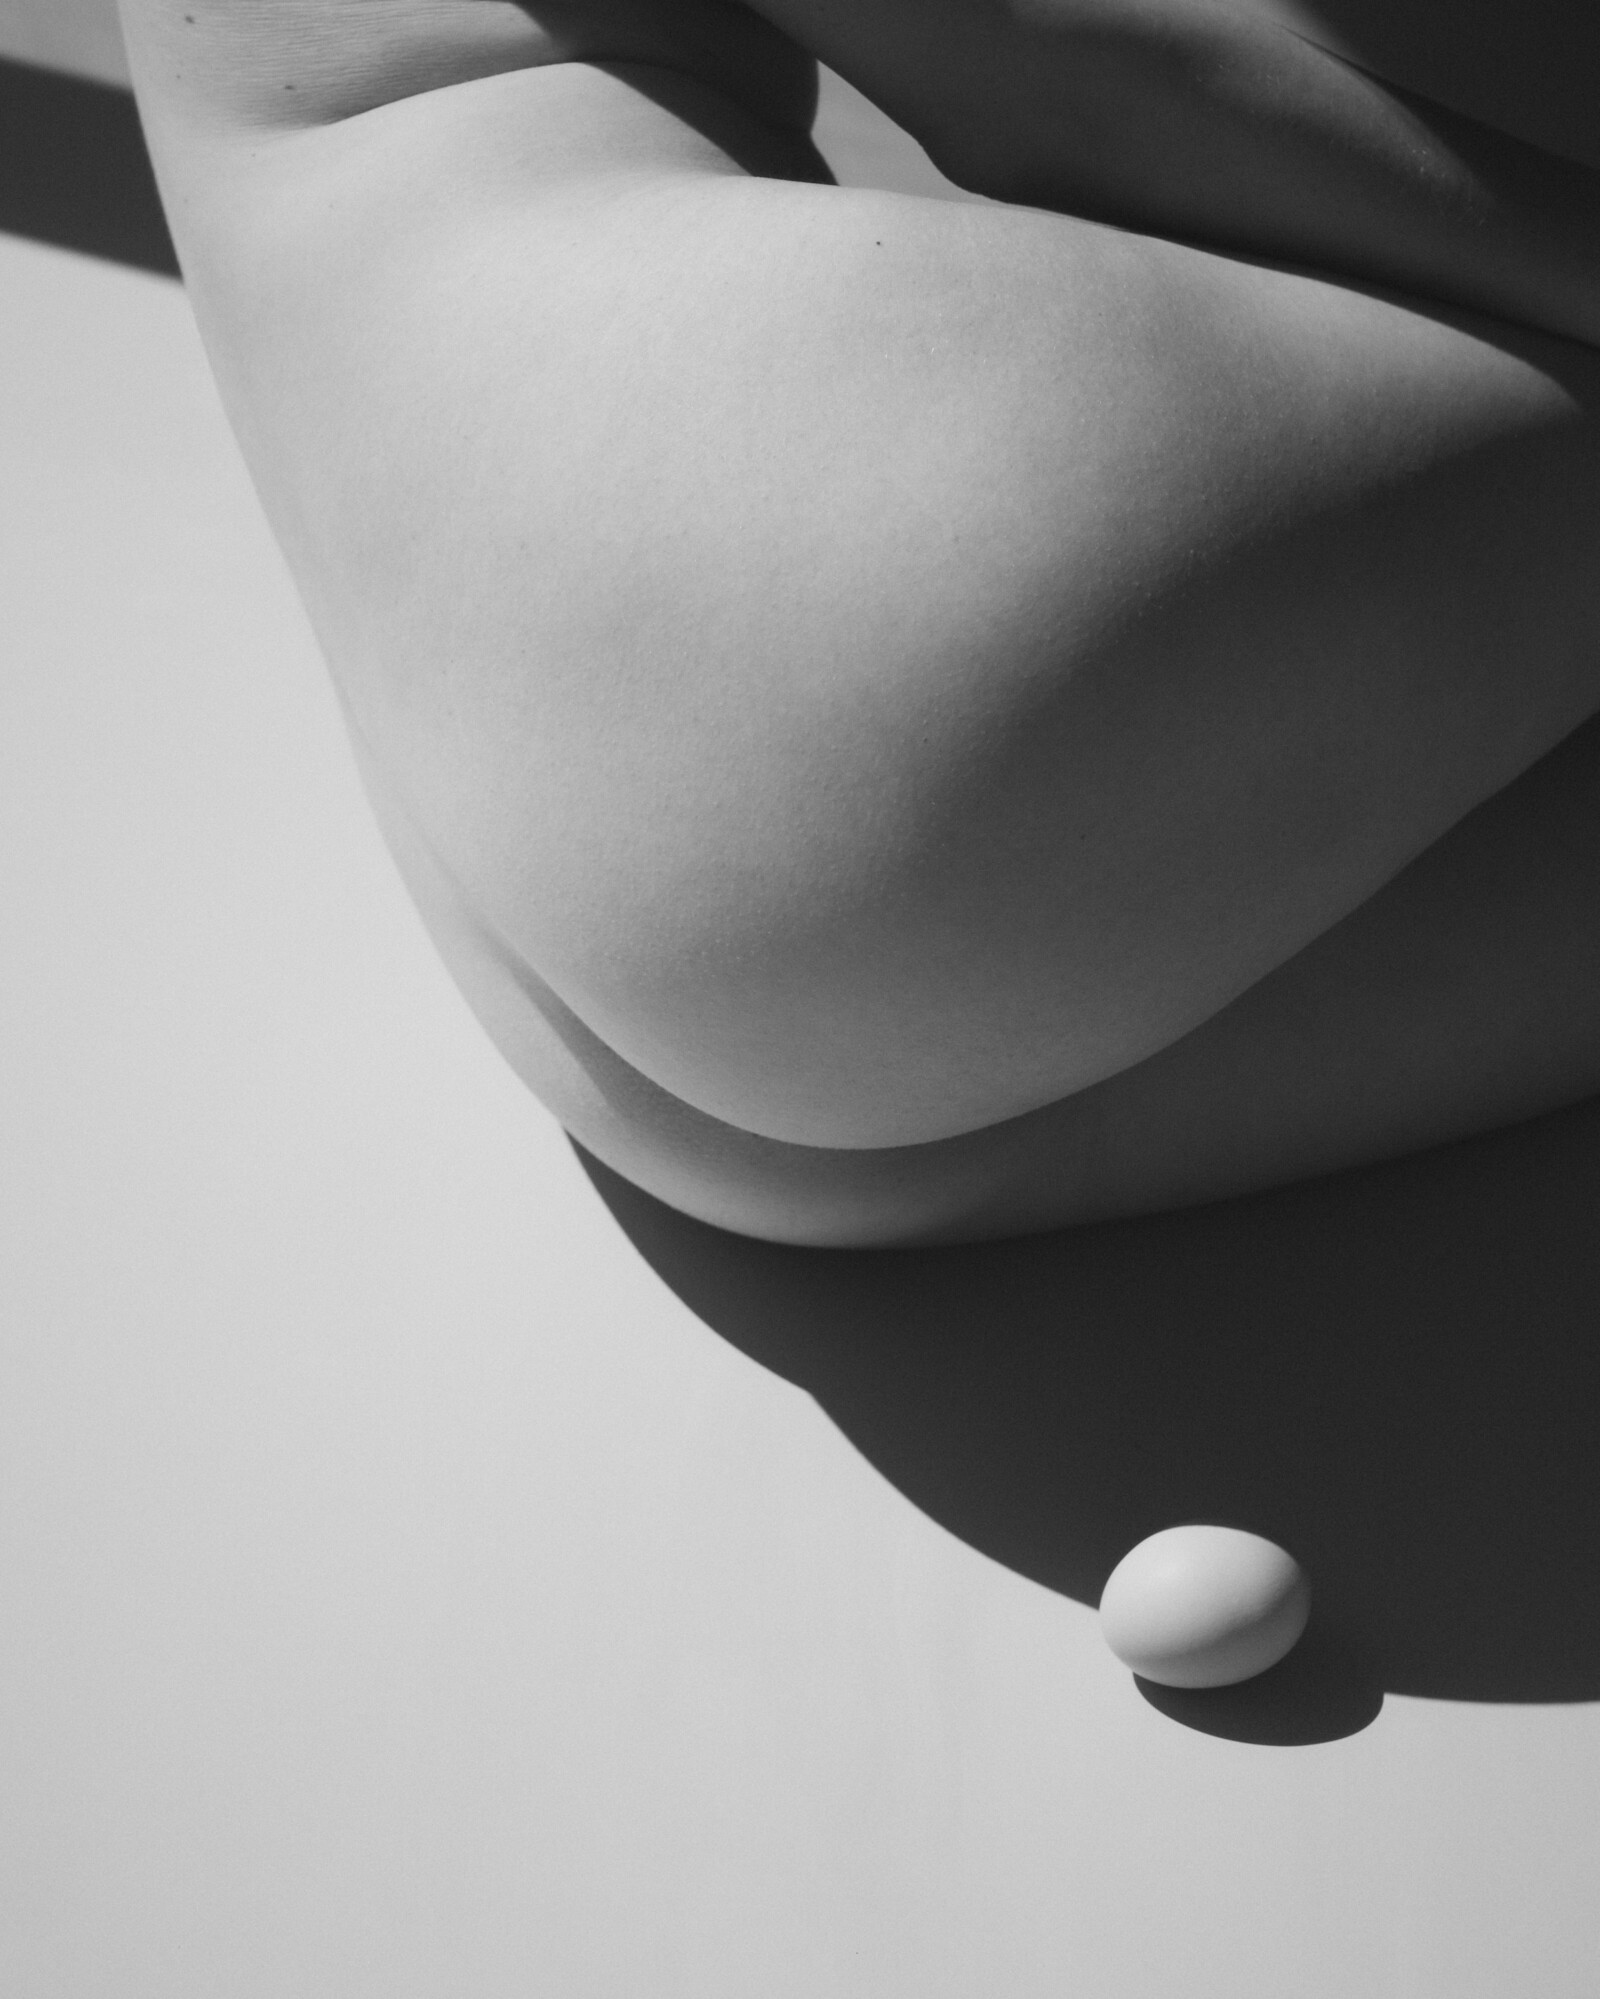 Female nude with egg in black and white